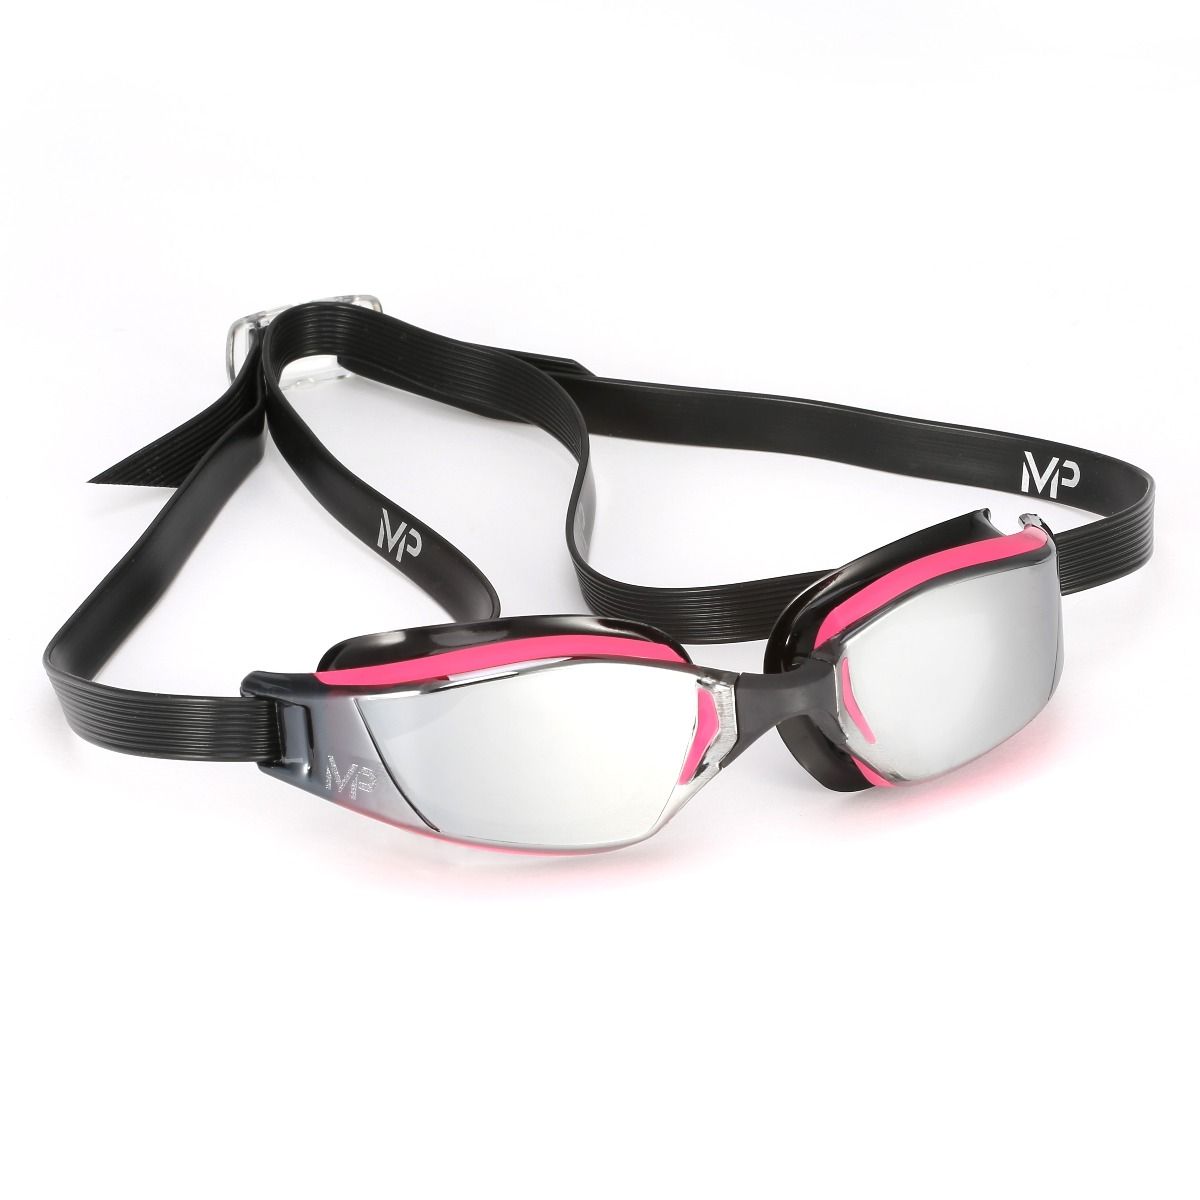 SS20 Phelps Xceed Goggles